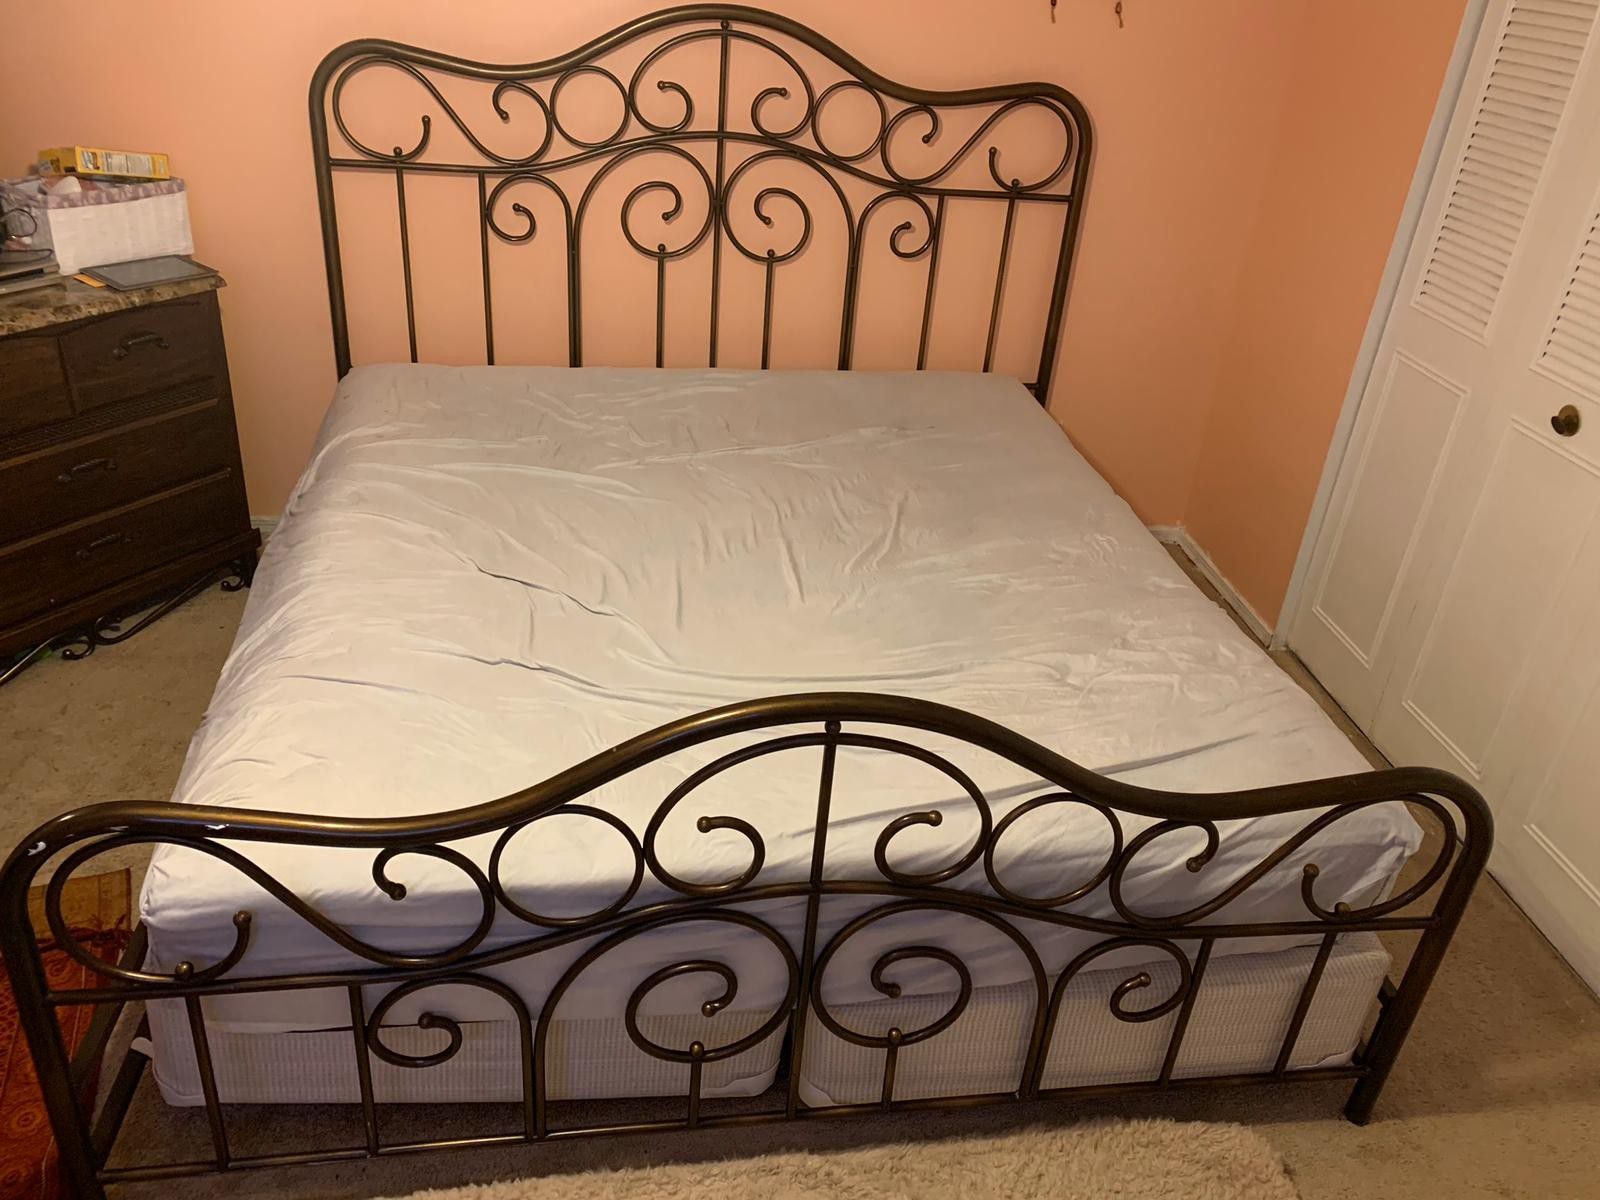 King bed frame / matress included